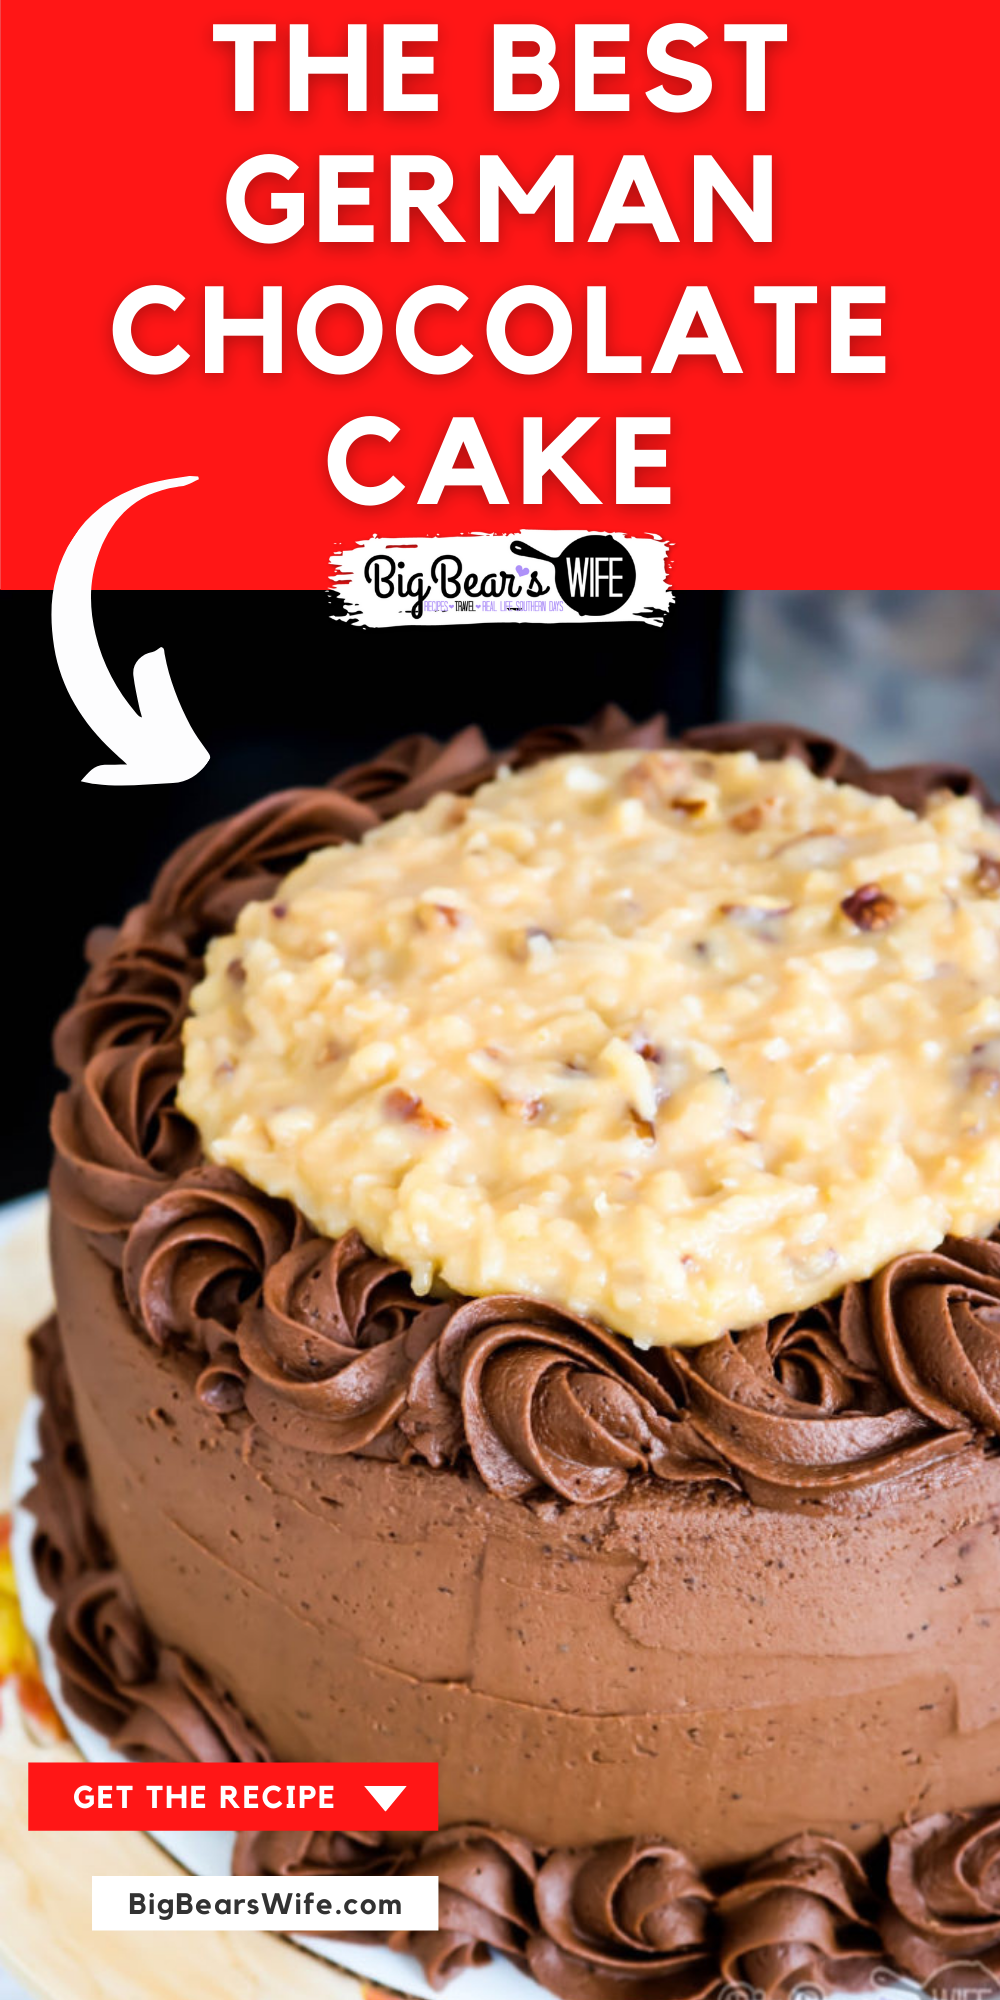 This German Chocolate Cake has three layers of amazing homemade chocolate cake, frosted with a homemade chocolate frosting and topped with a delicious pecan coconut filling! via @bigbearswife